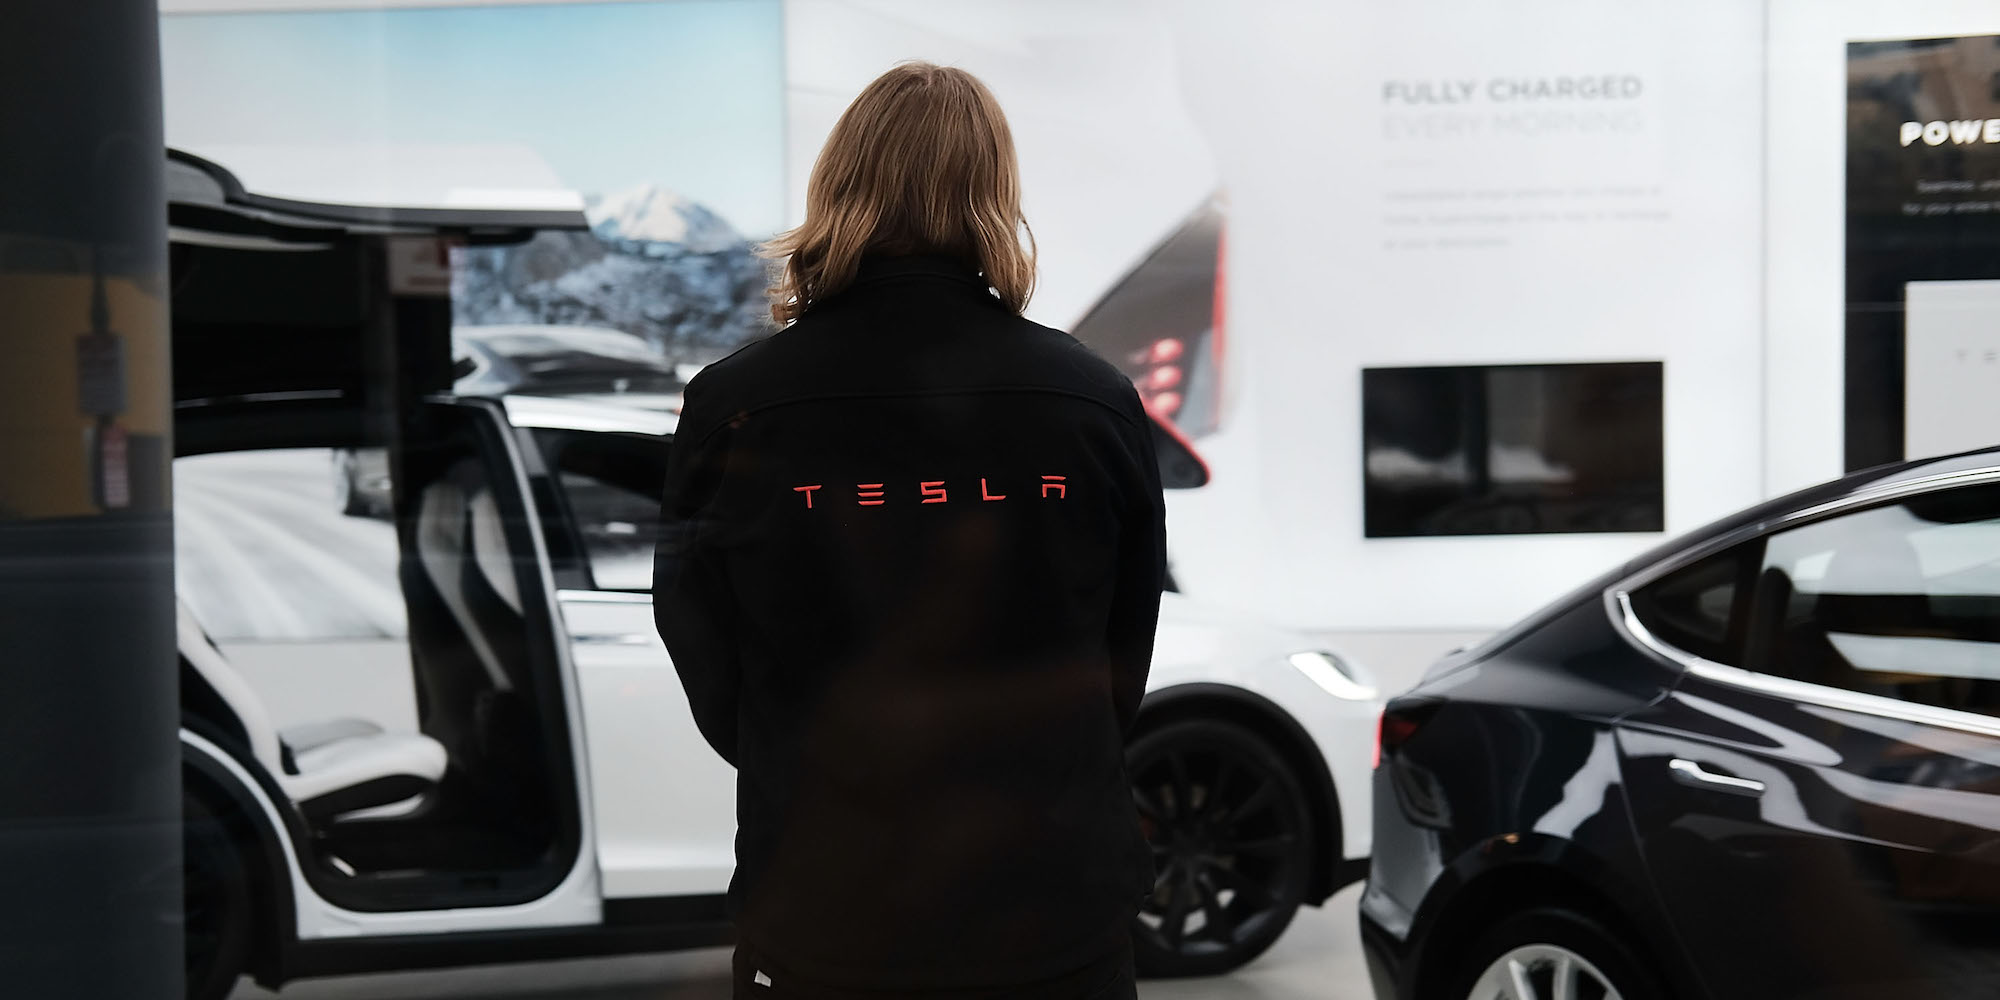 Ex-Tesla employees reveal the worst parts of working at the company (TSLA)